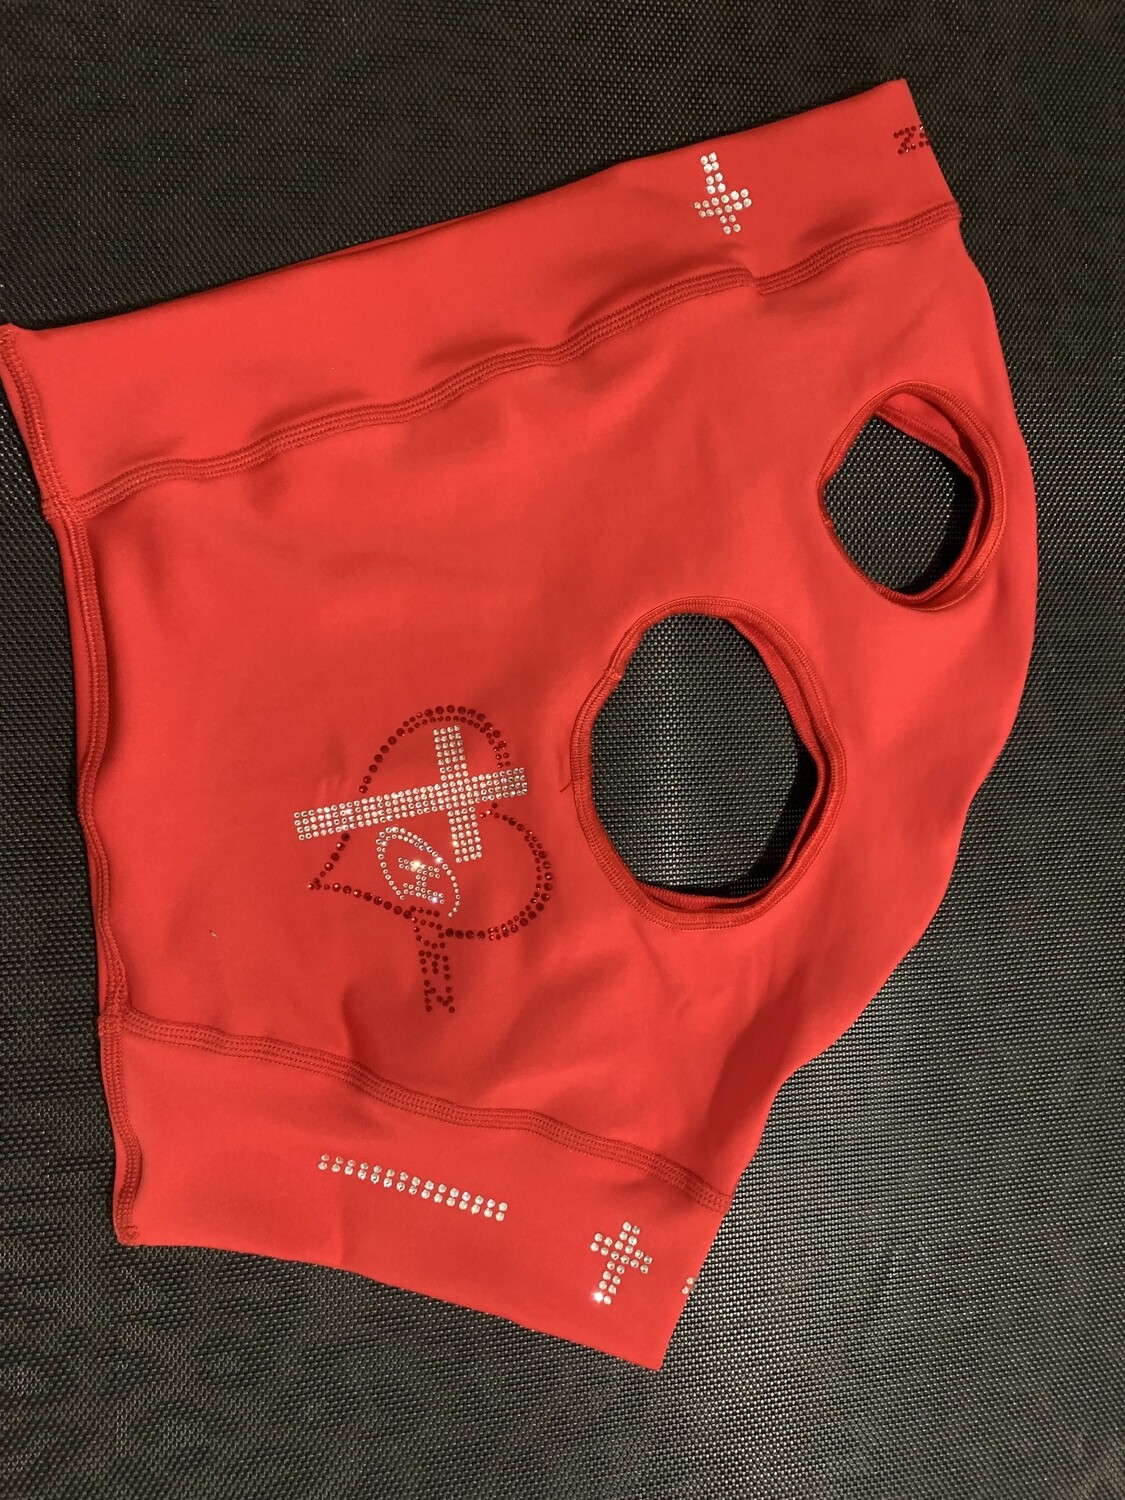 Red Medium Mask With Bling - in stock now